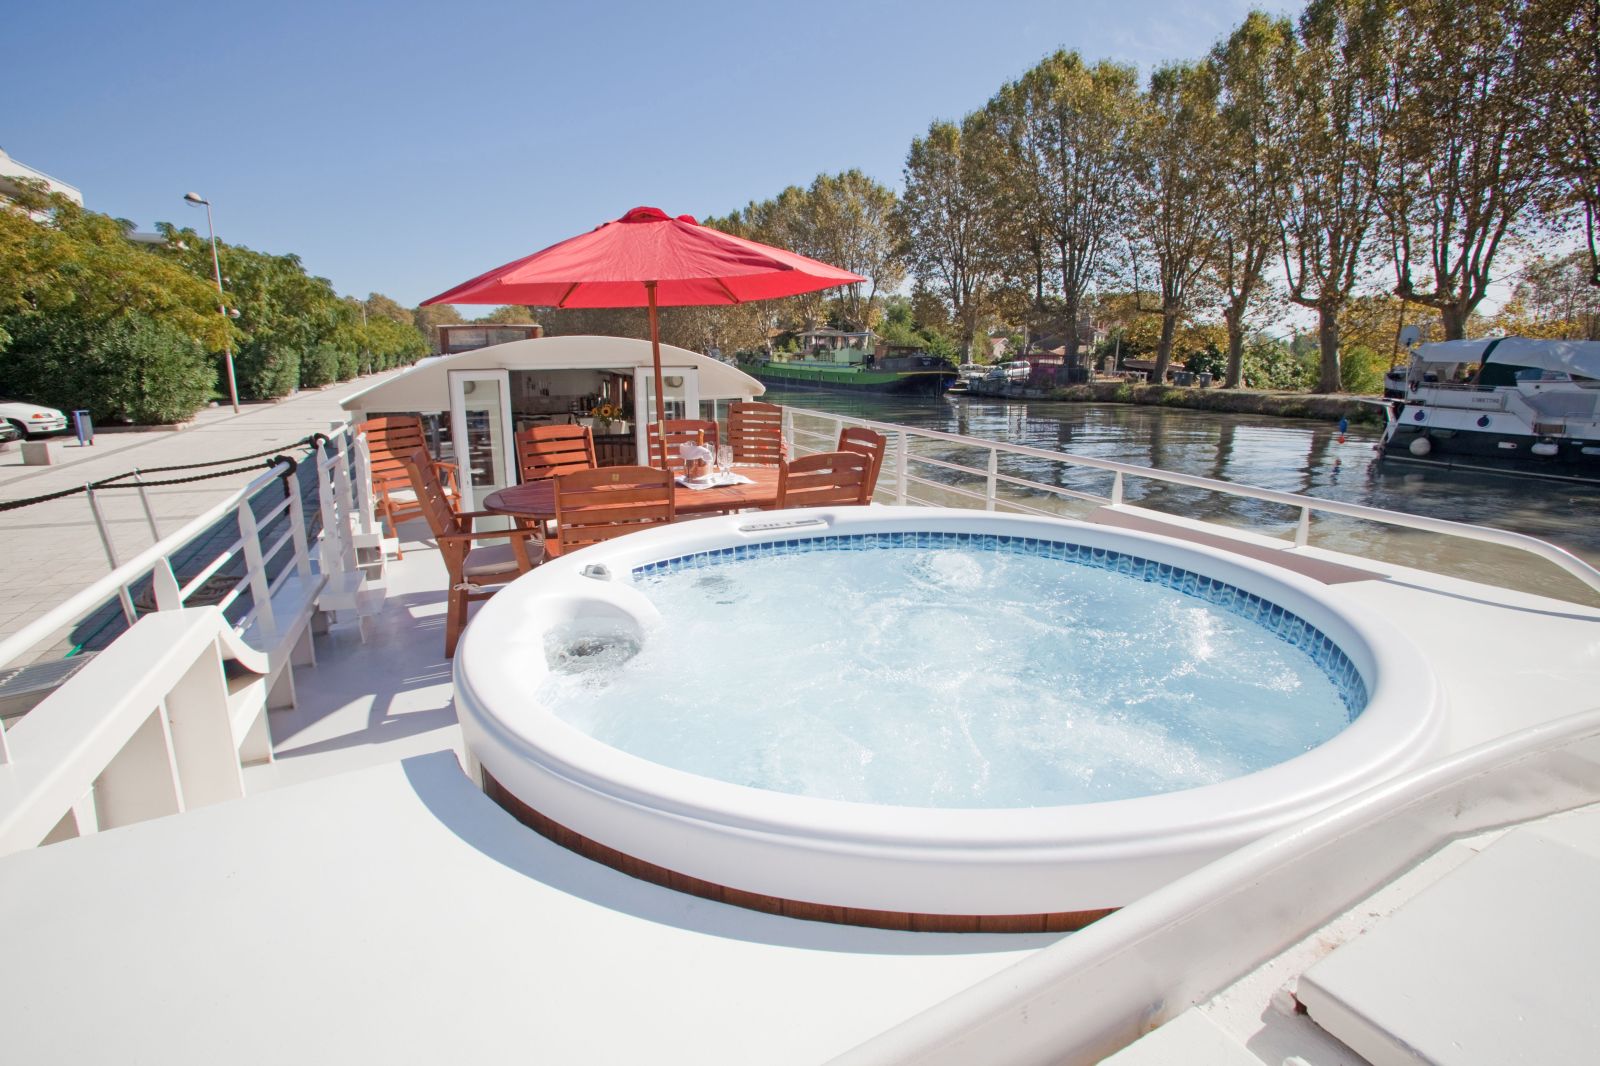 Jacuzzi and sun deck on board the Enchante river cruise in France